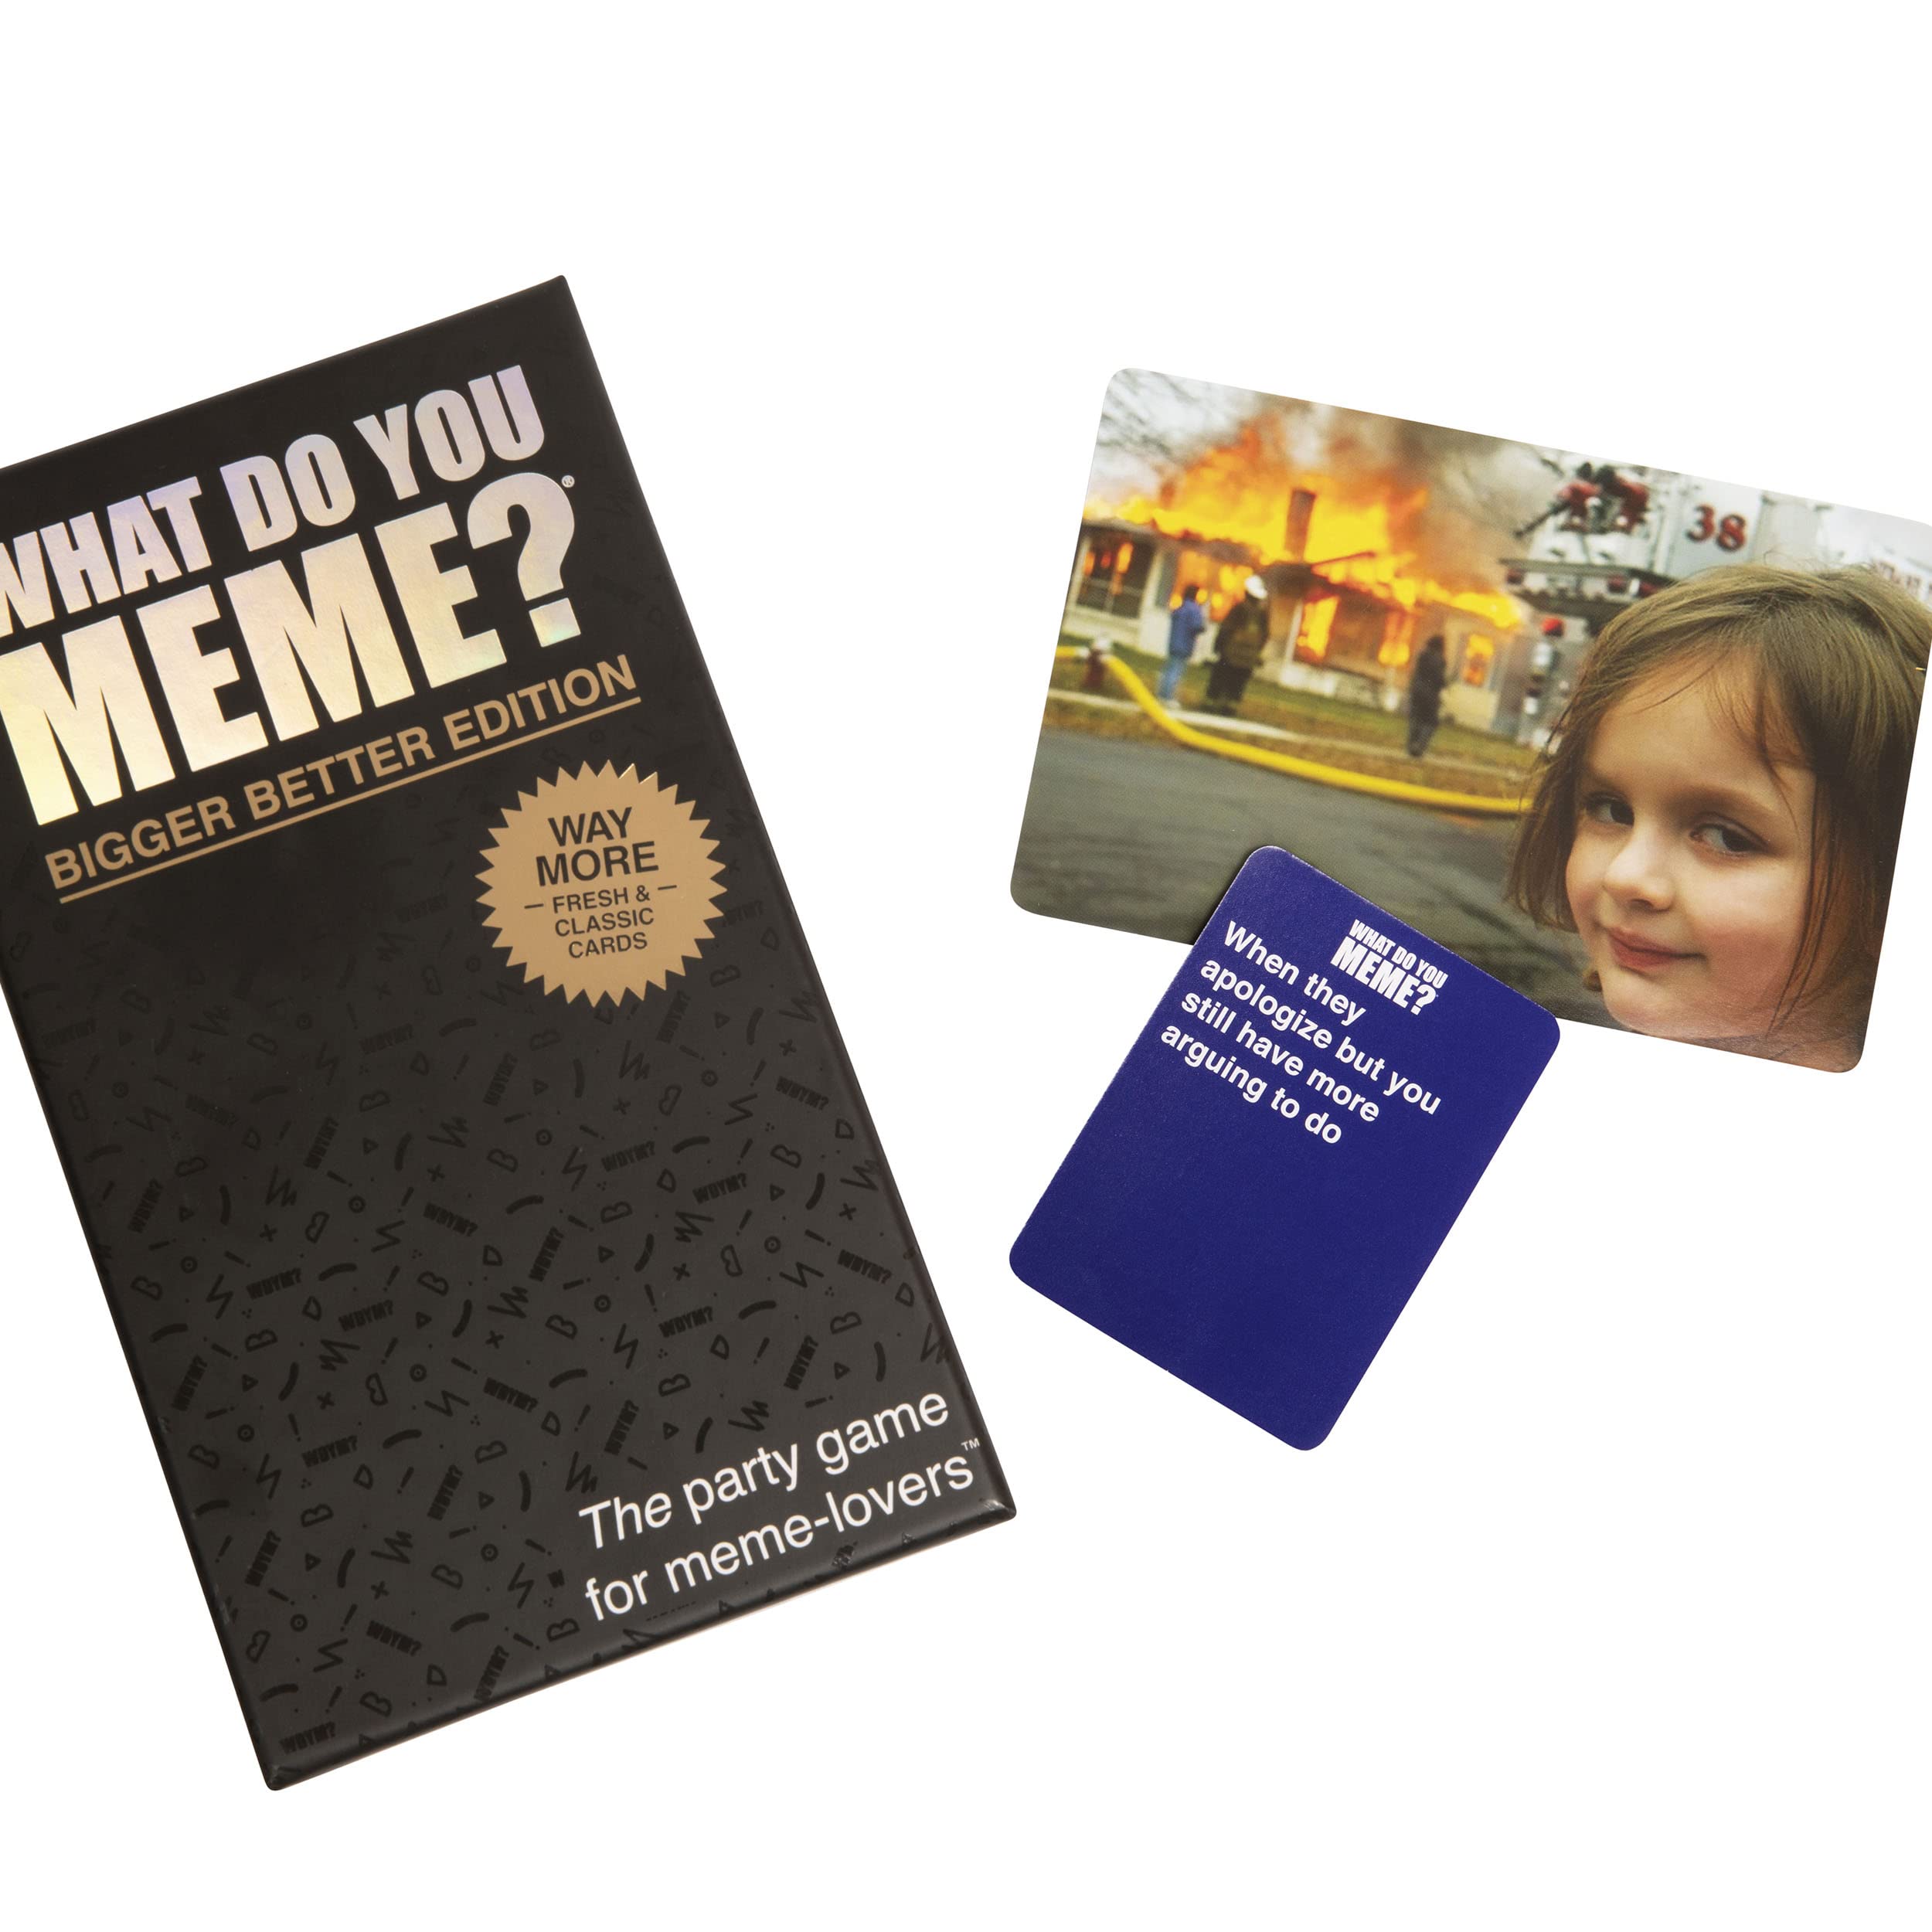 WHAT DO YOU MEME? Bigger Better Edition - Adult Card Games for Game Night